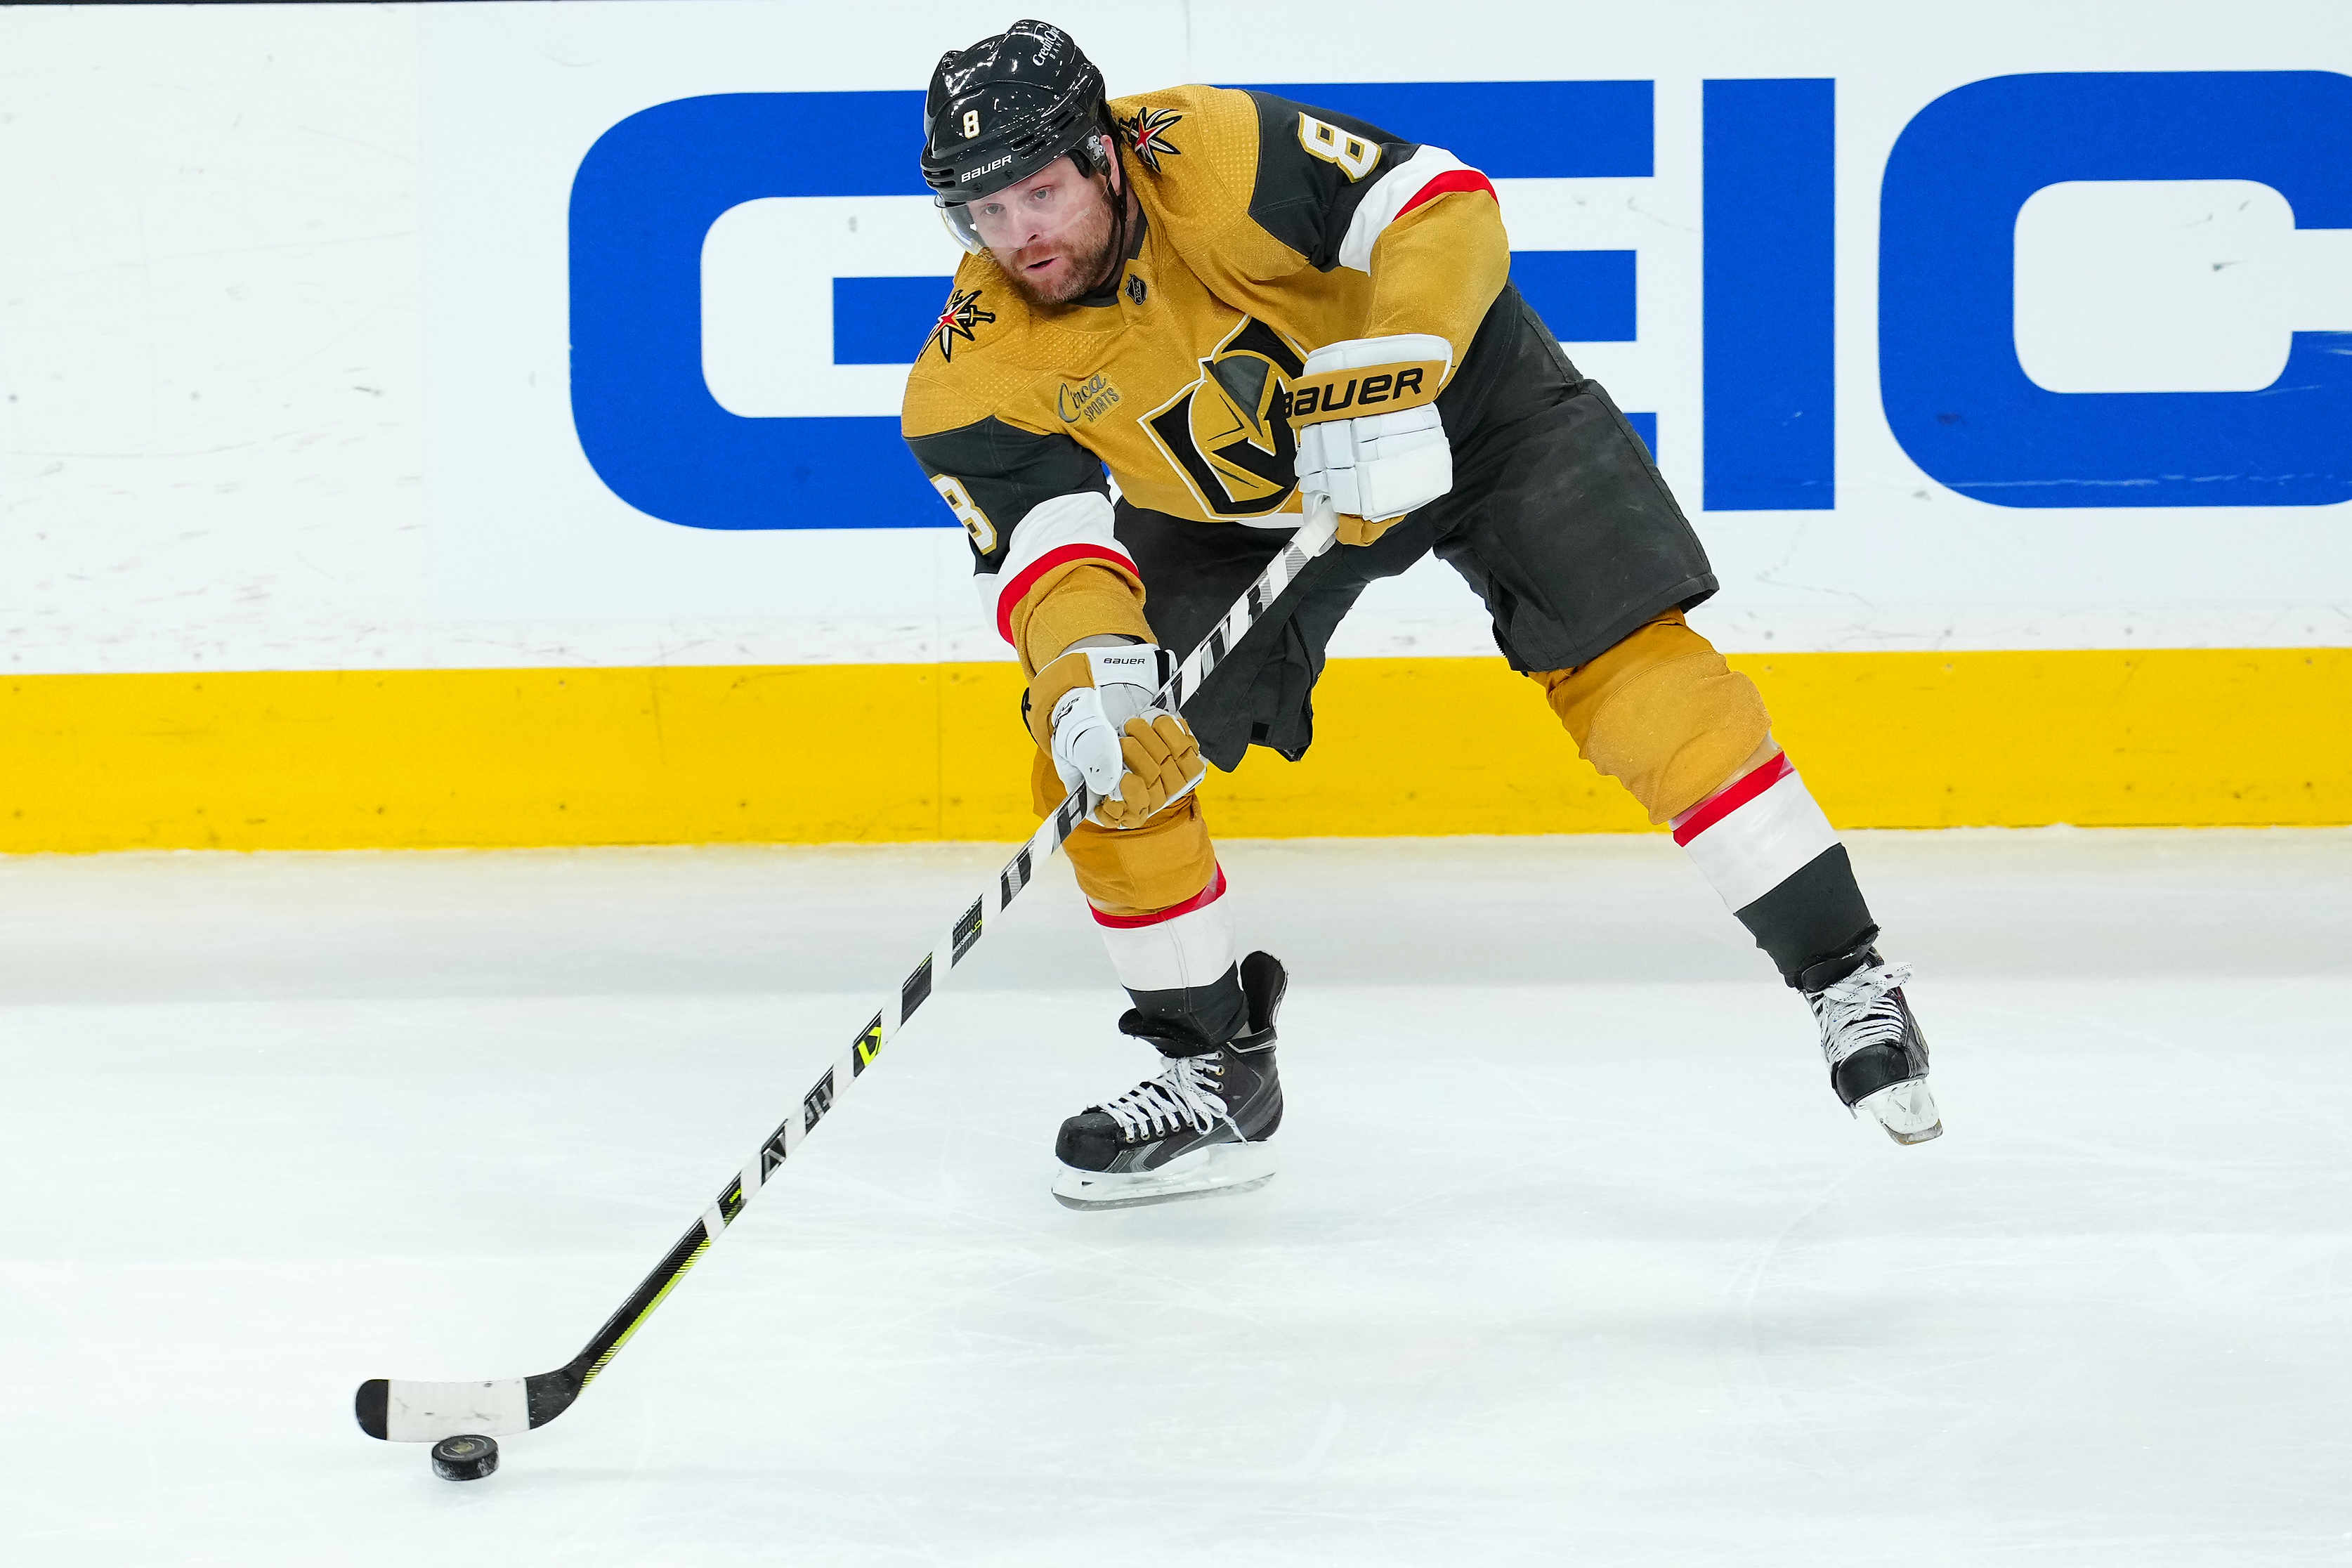 New Jersey Devils Can Complete Offseason With Phil Kessel Acquisition